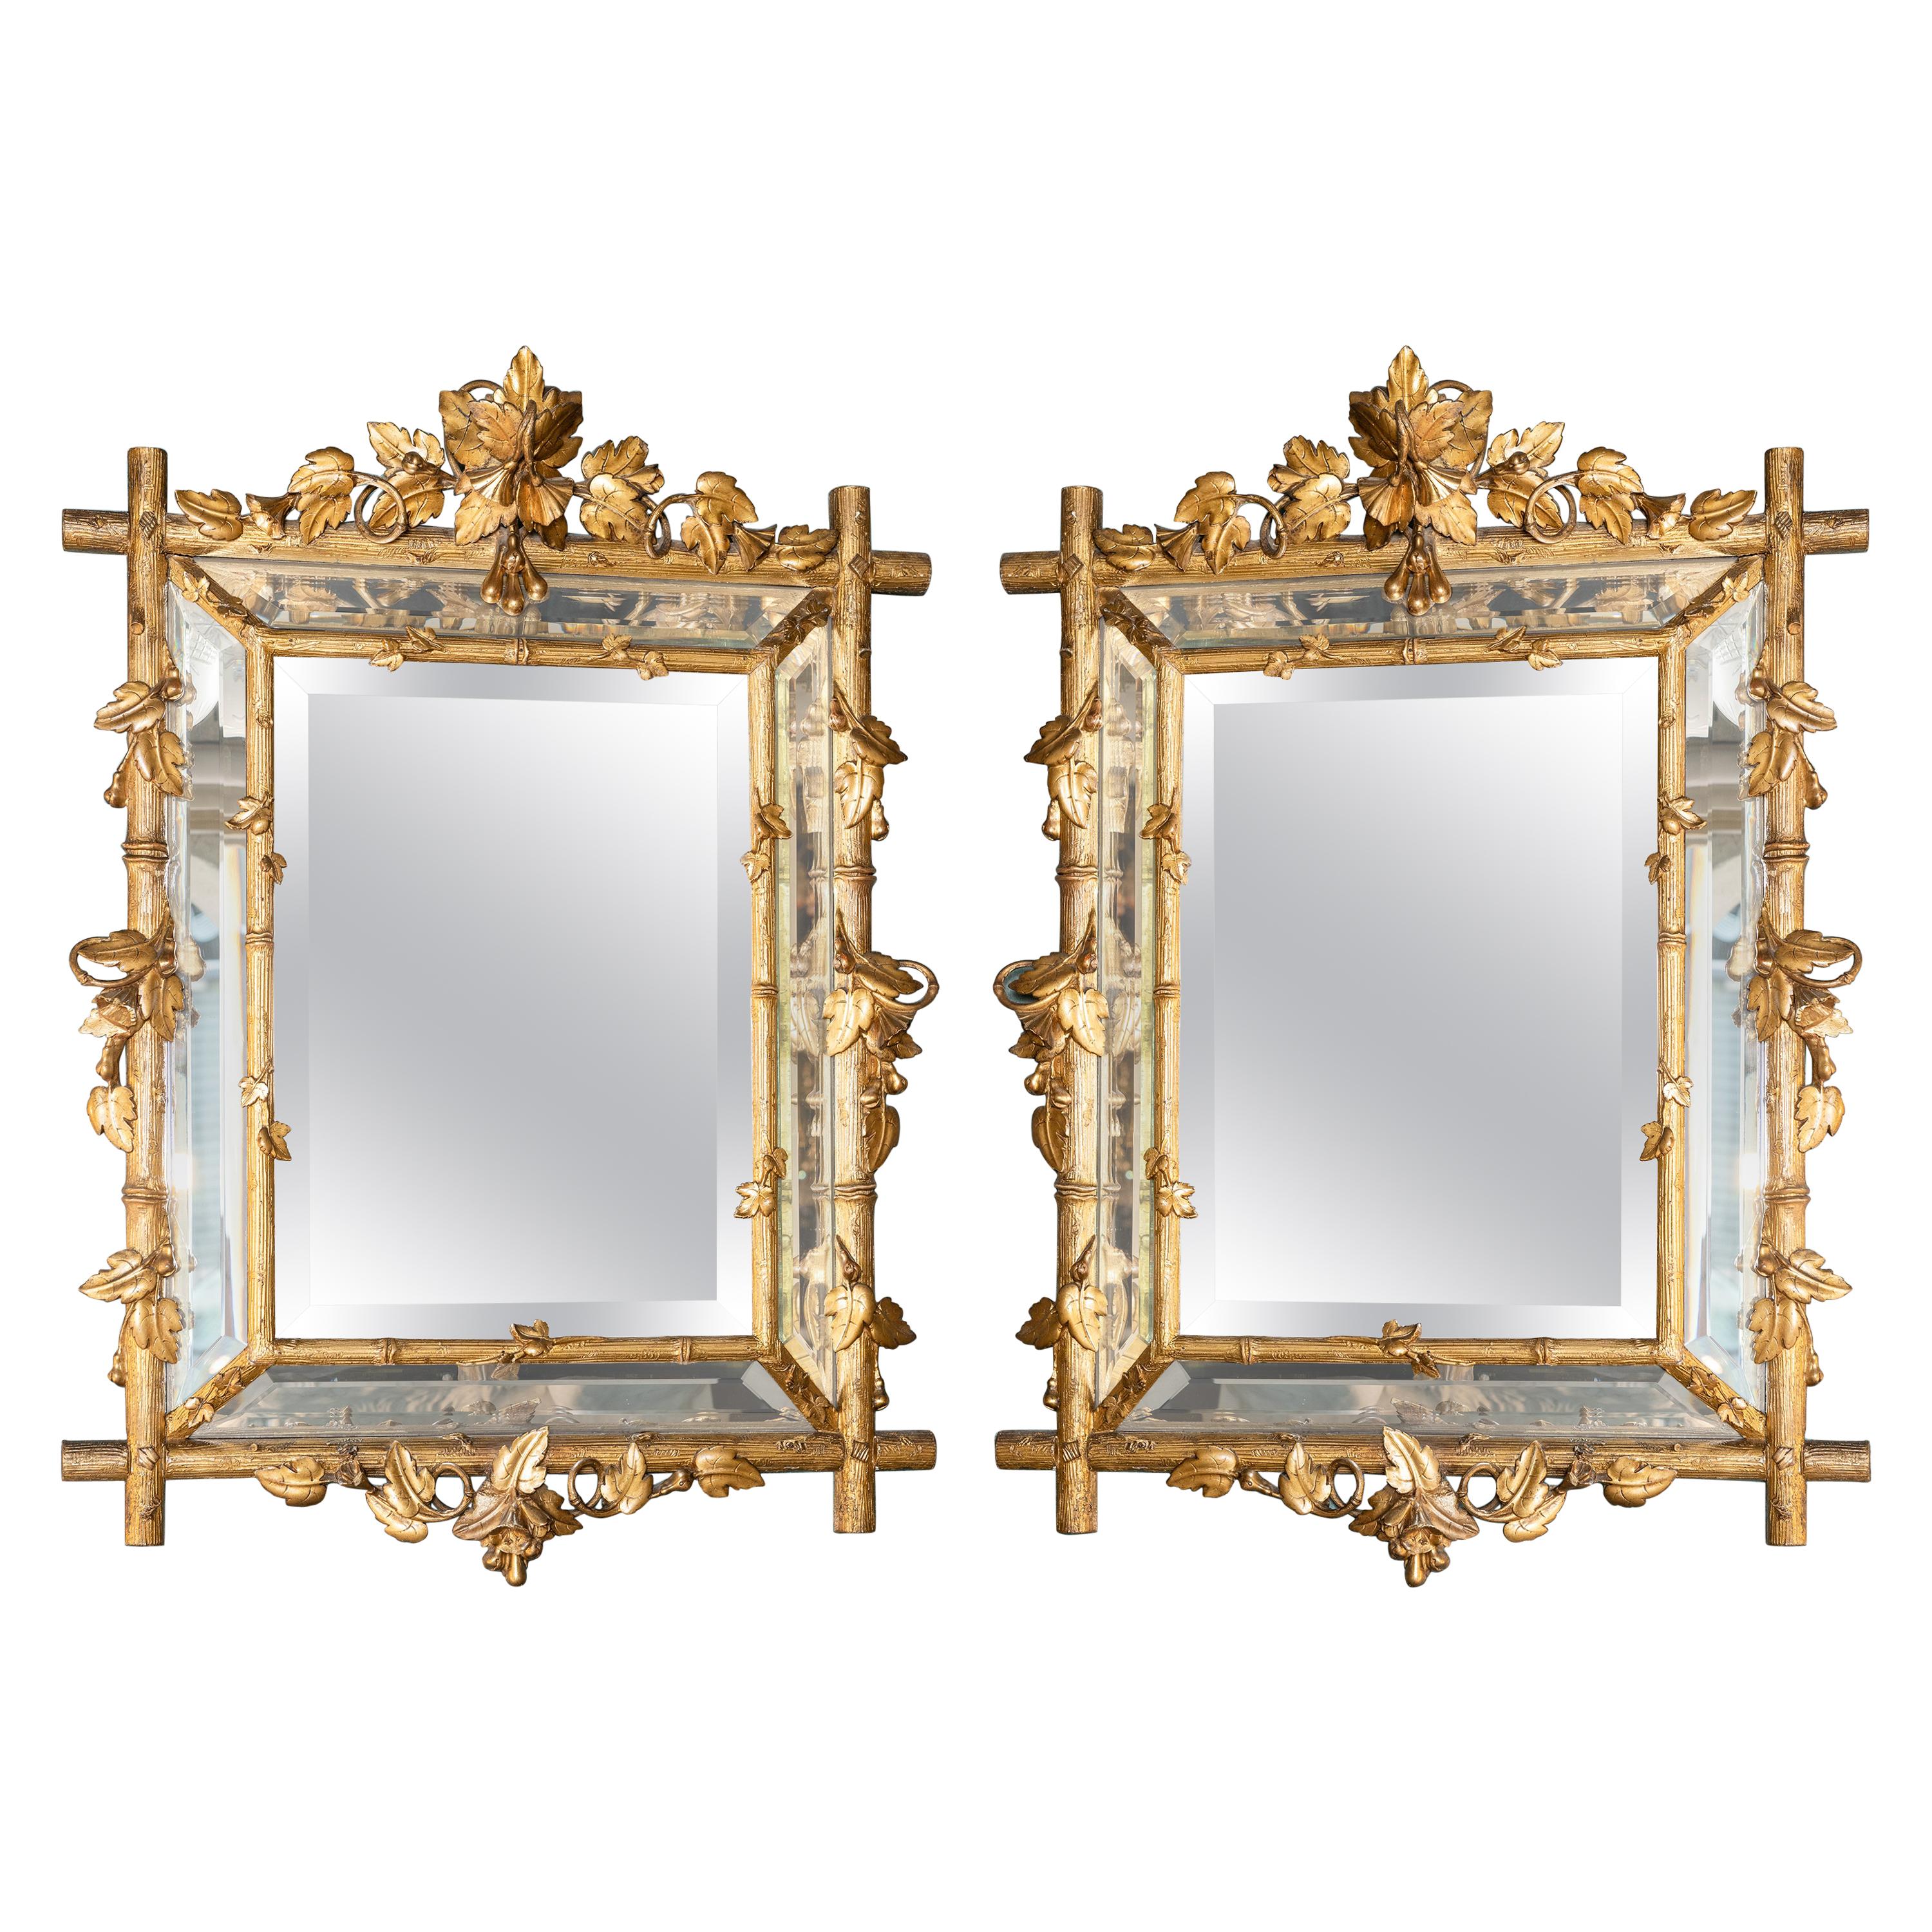 Pair of Gold Patinated Wood Mirrors, England, Late 19th Century